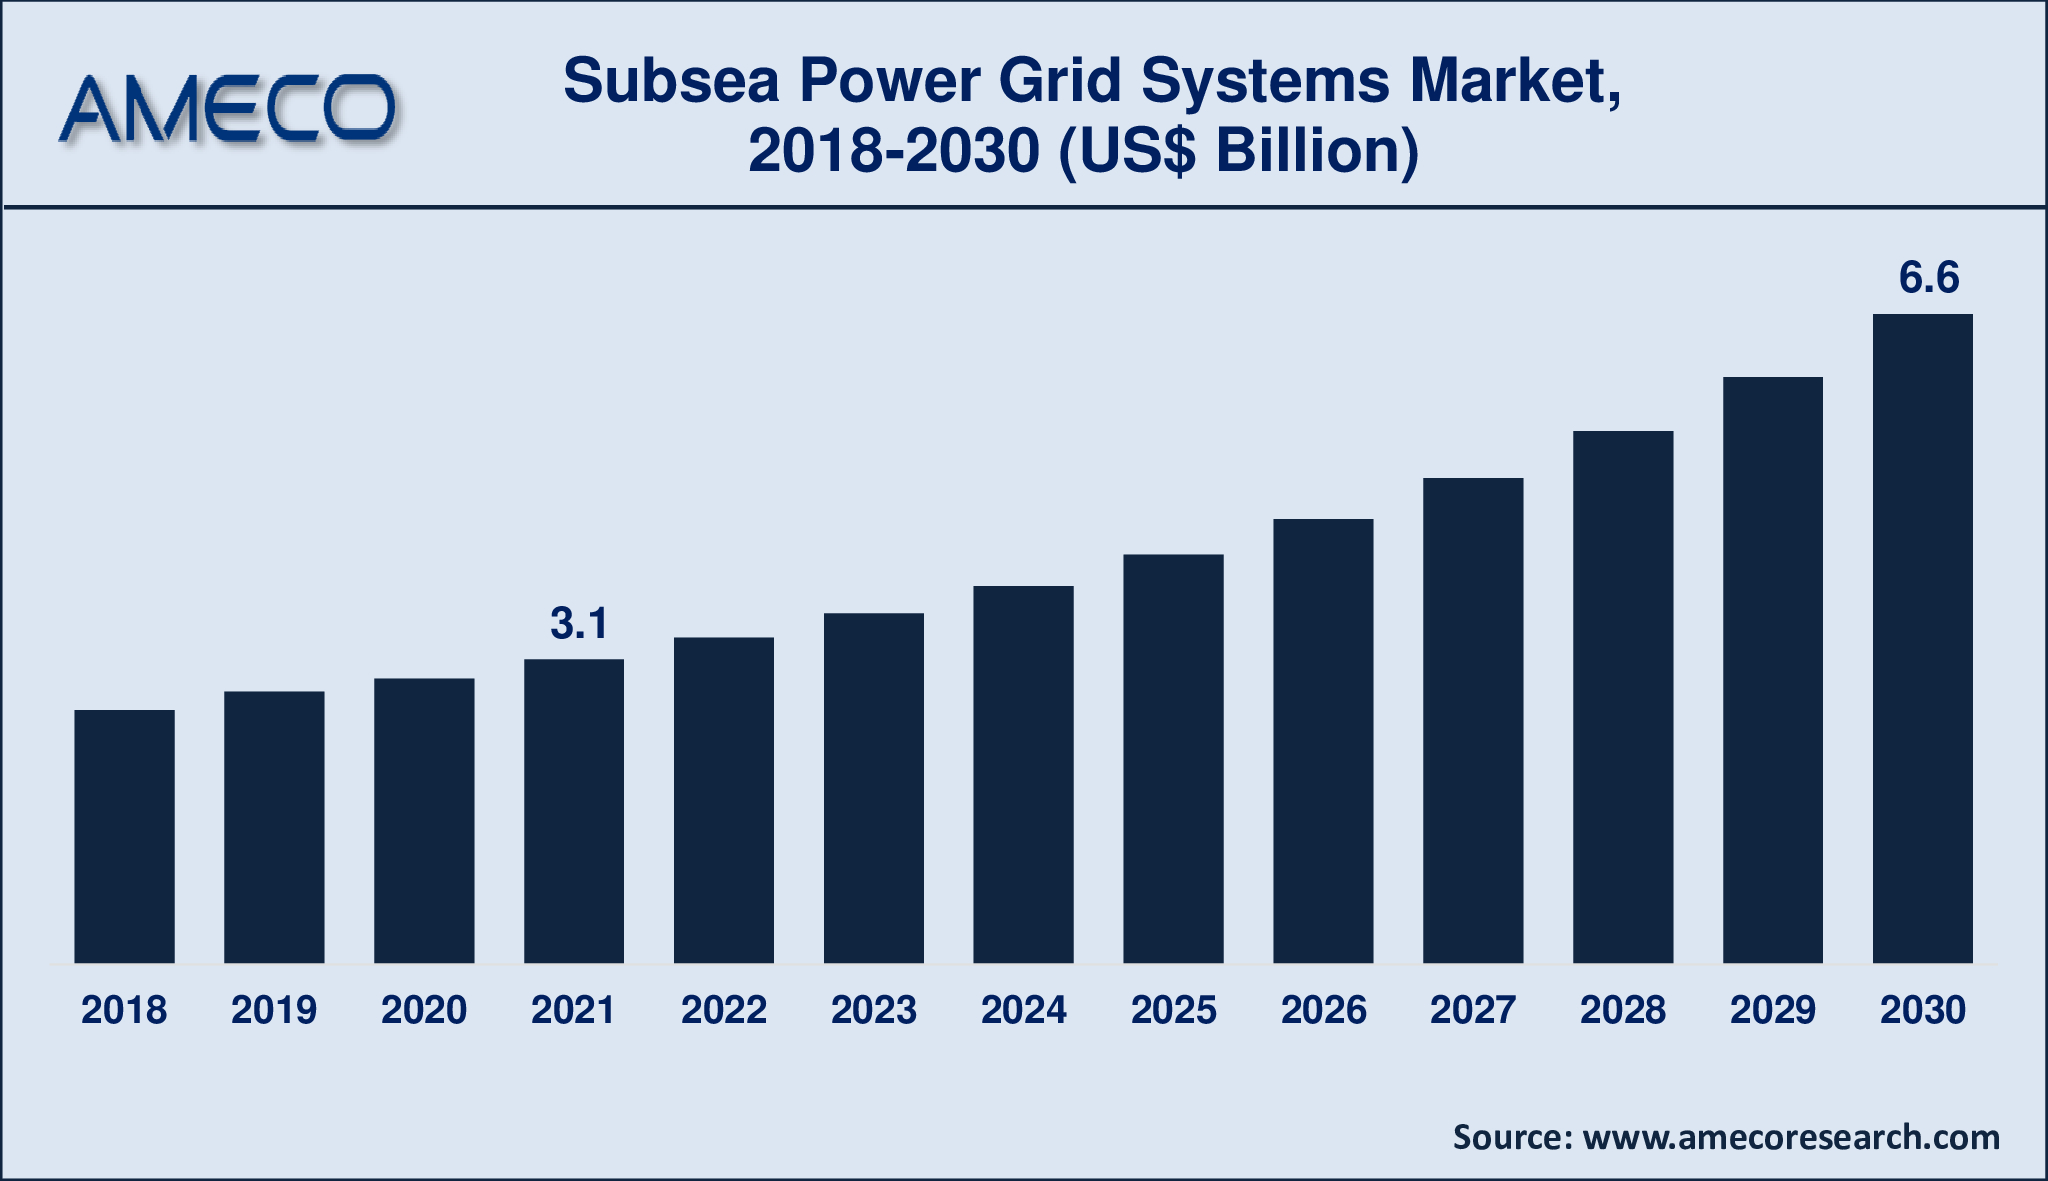  Subsea Power Grid Systems Market Size